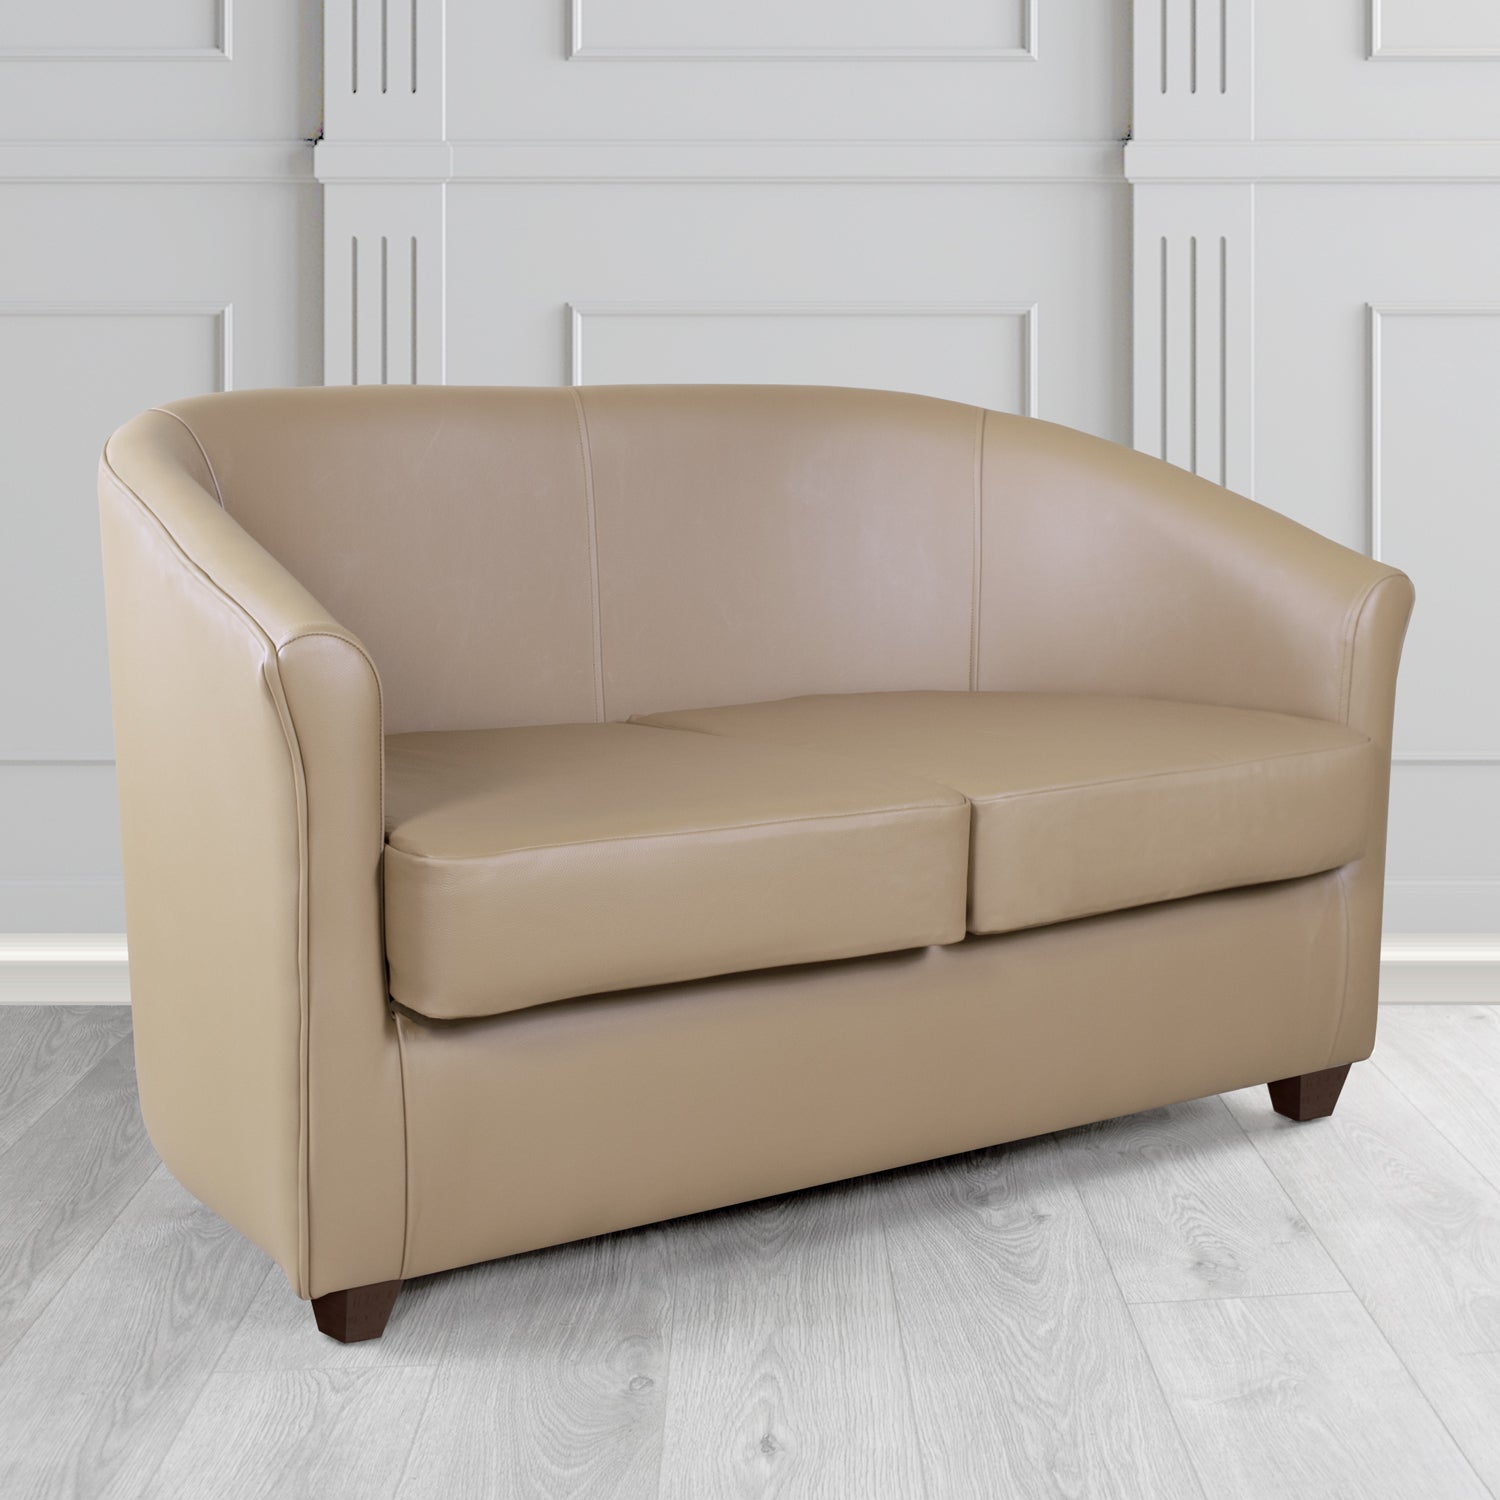 Cannes 2 Seater Tub Sofa in Just Colour Magnum Crib 5 Faux Leather - The Tub Chair Shop